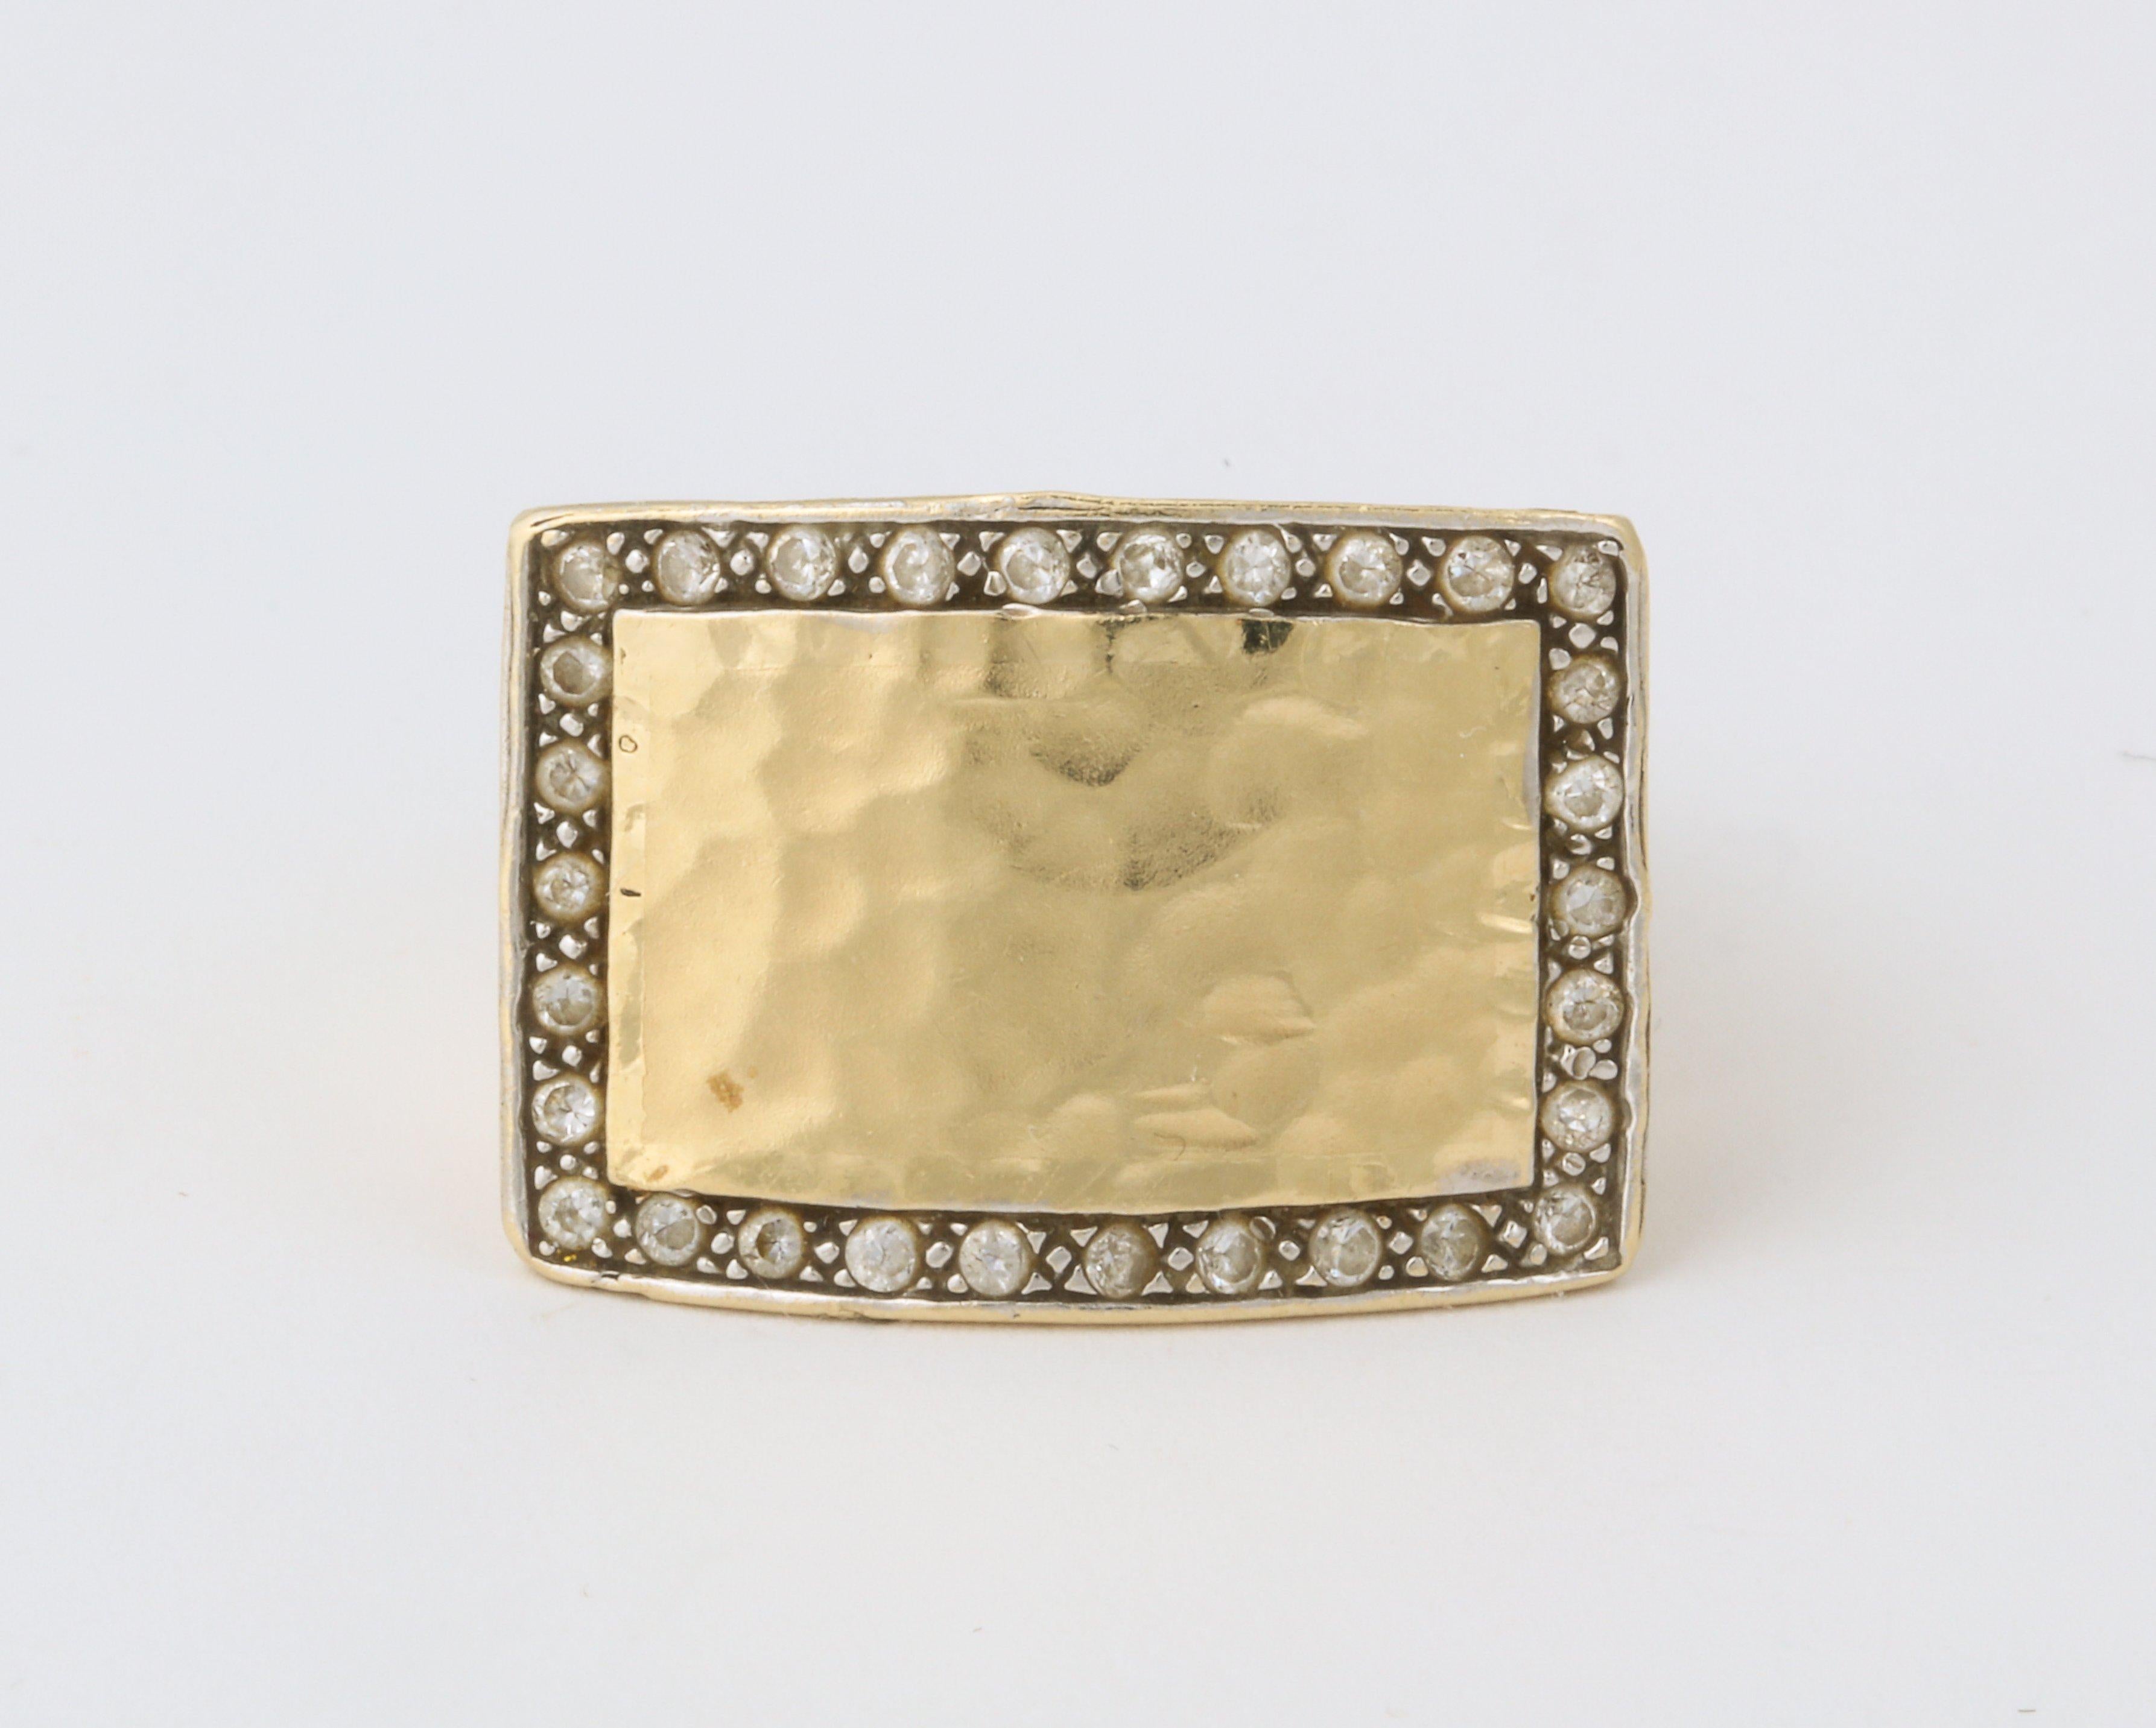 A stunning hand hammered 18K gold ring with diamonds set along the edge.  The rectangular shape makes it very appealing to wear on the middle finger as well as the
ring finger.  